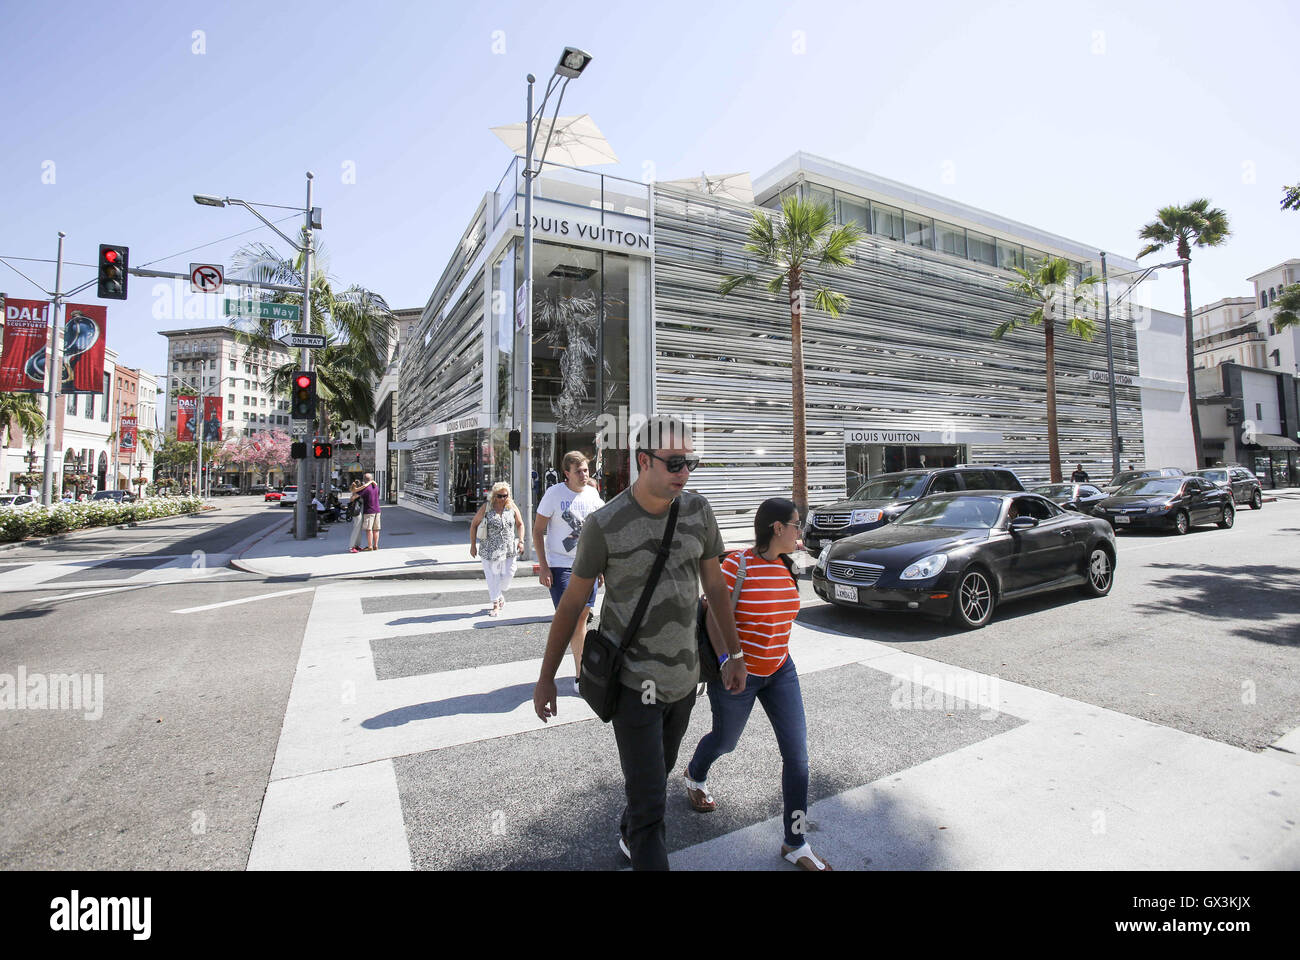 Los Angeles, California, USA. 30th Aug, 2016. Louis Vuitton store - 295 N  Rodeo Dr, Beverly Hills, CA 90210. © Ringo Chiu/ZUMA Wire/Alamy Live News  Stock Photo - Alamy